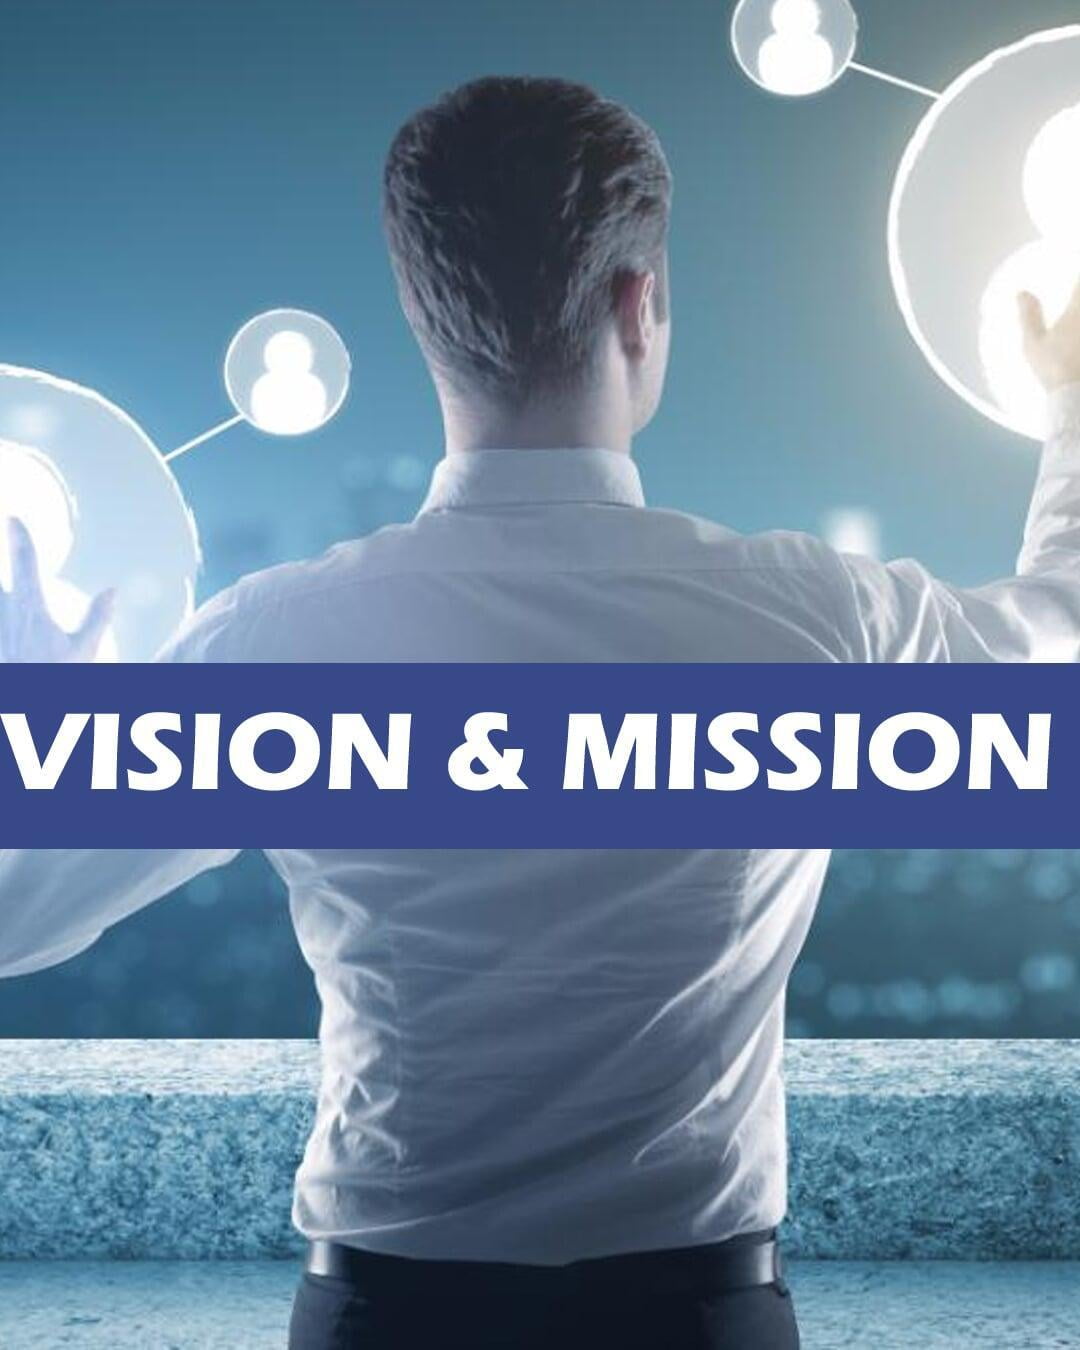 Vision avd Mission of Management Course at ITS